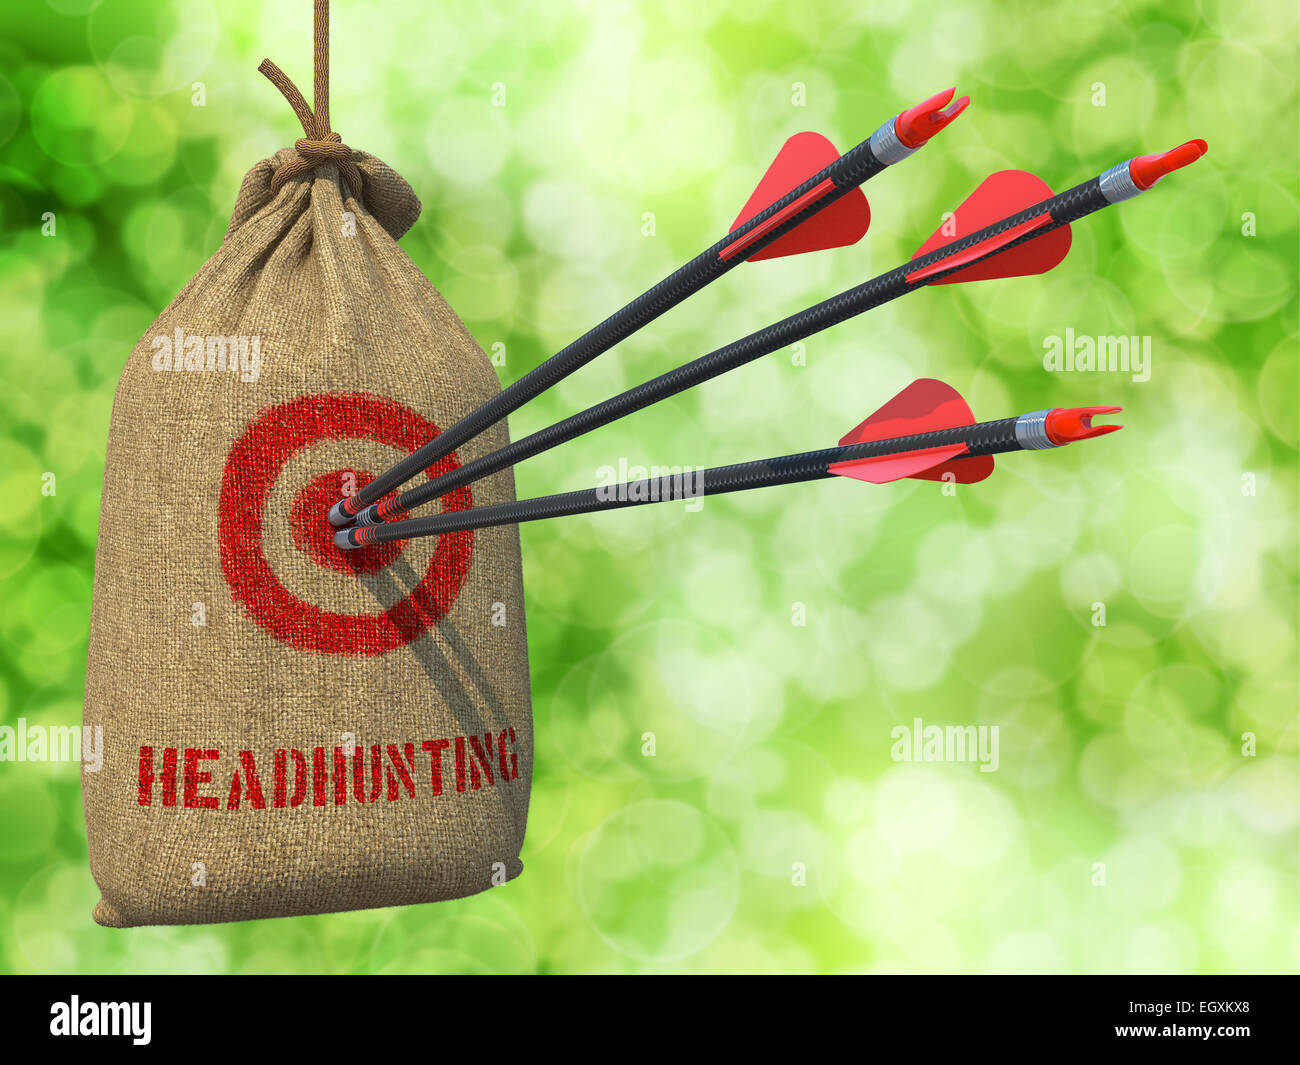 Headhunting - Arrows Hit in Red Target. Stock Photo